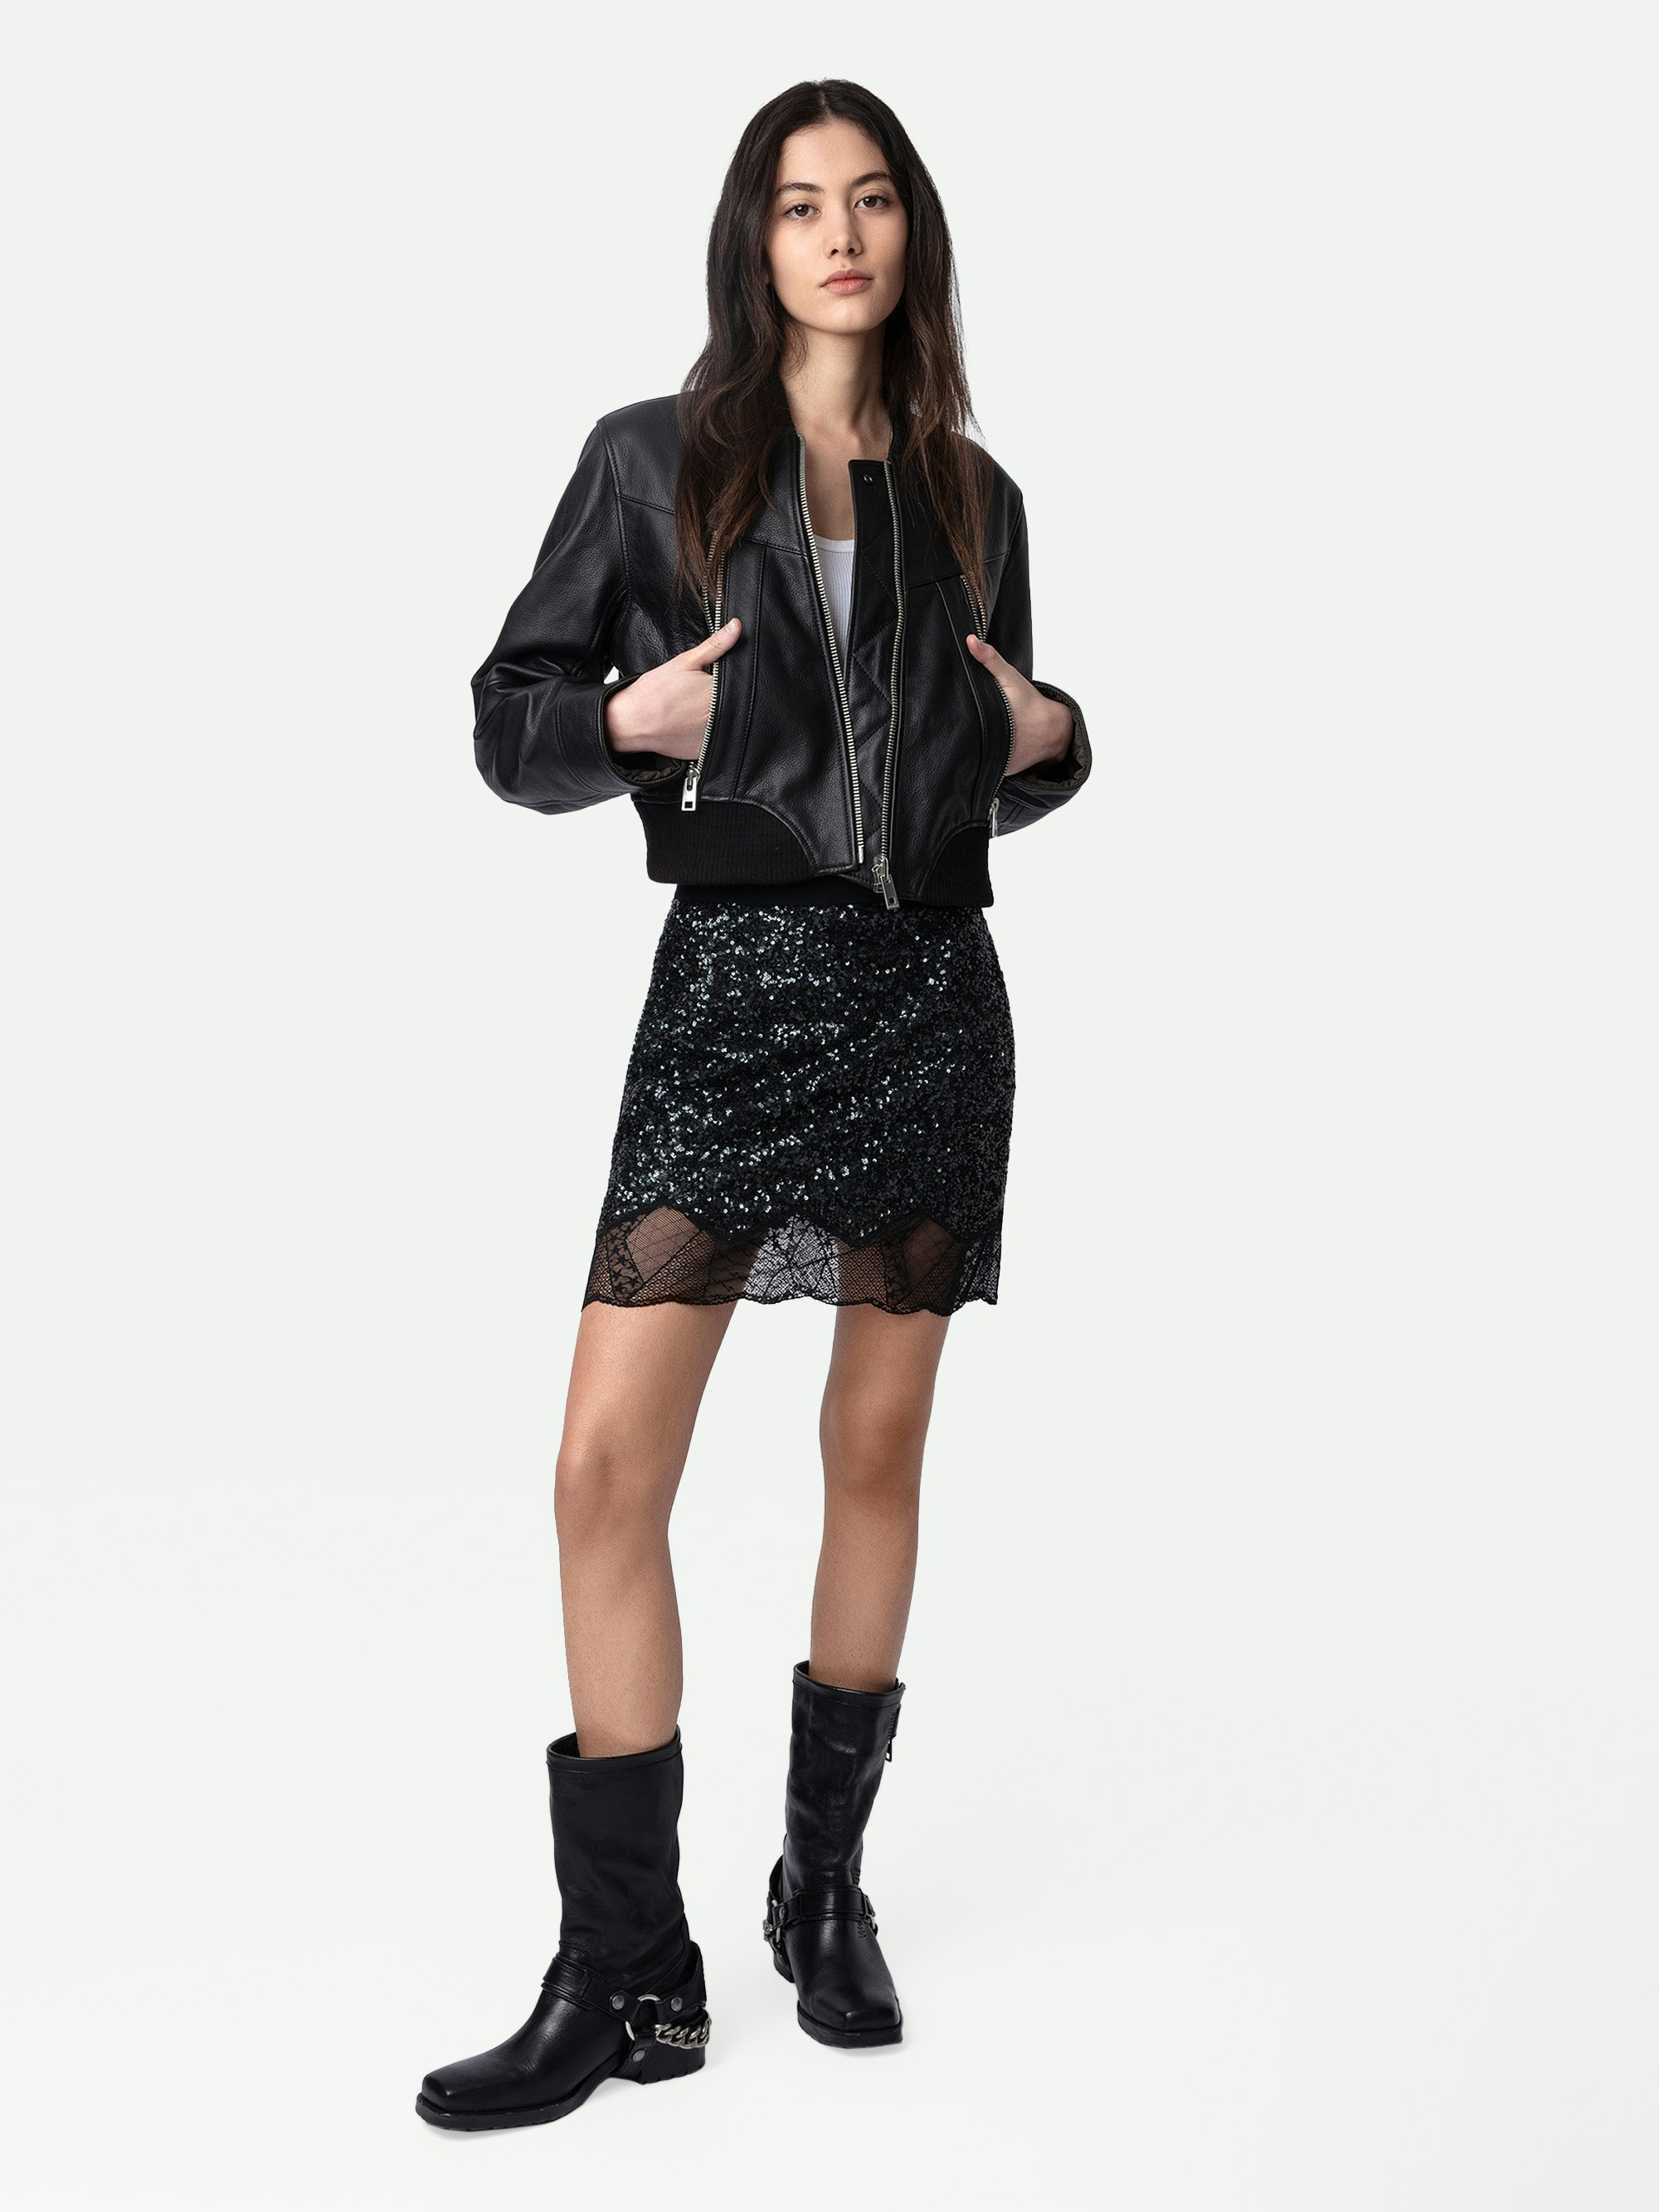 Justicias Sequins Skirt - Short black skirt with elasticated waist, sequins and lace trim.